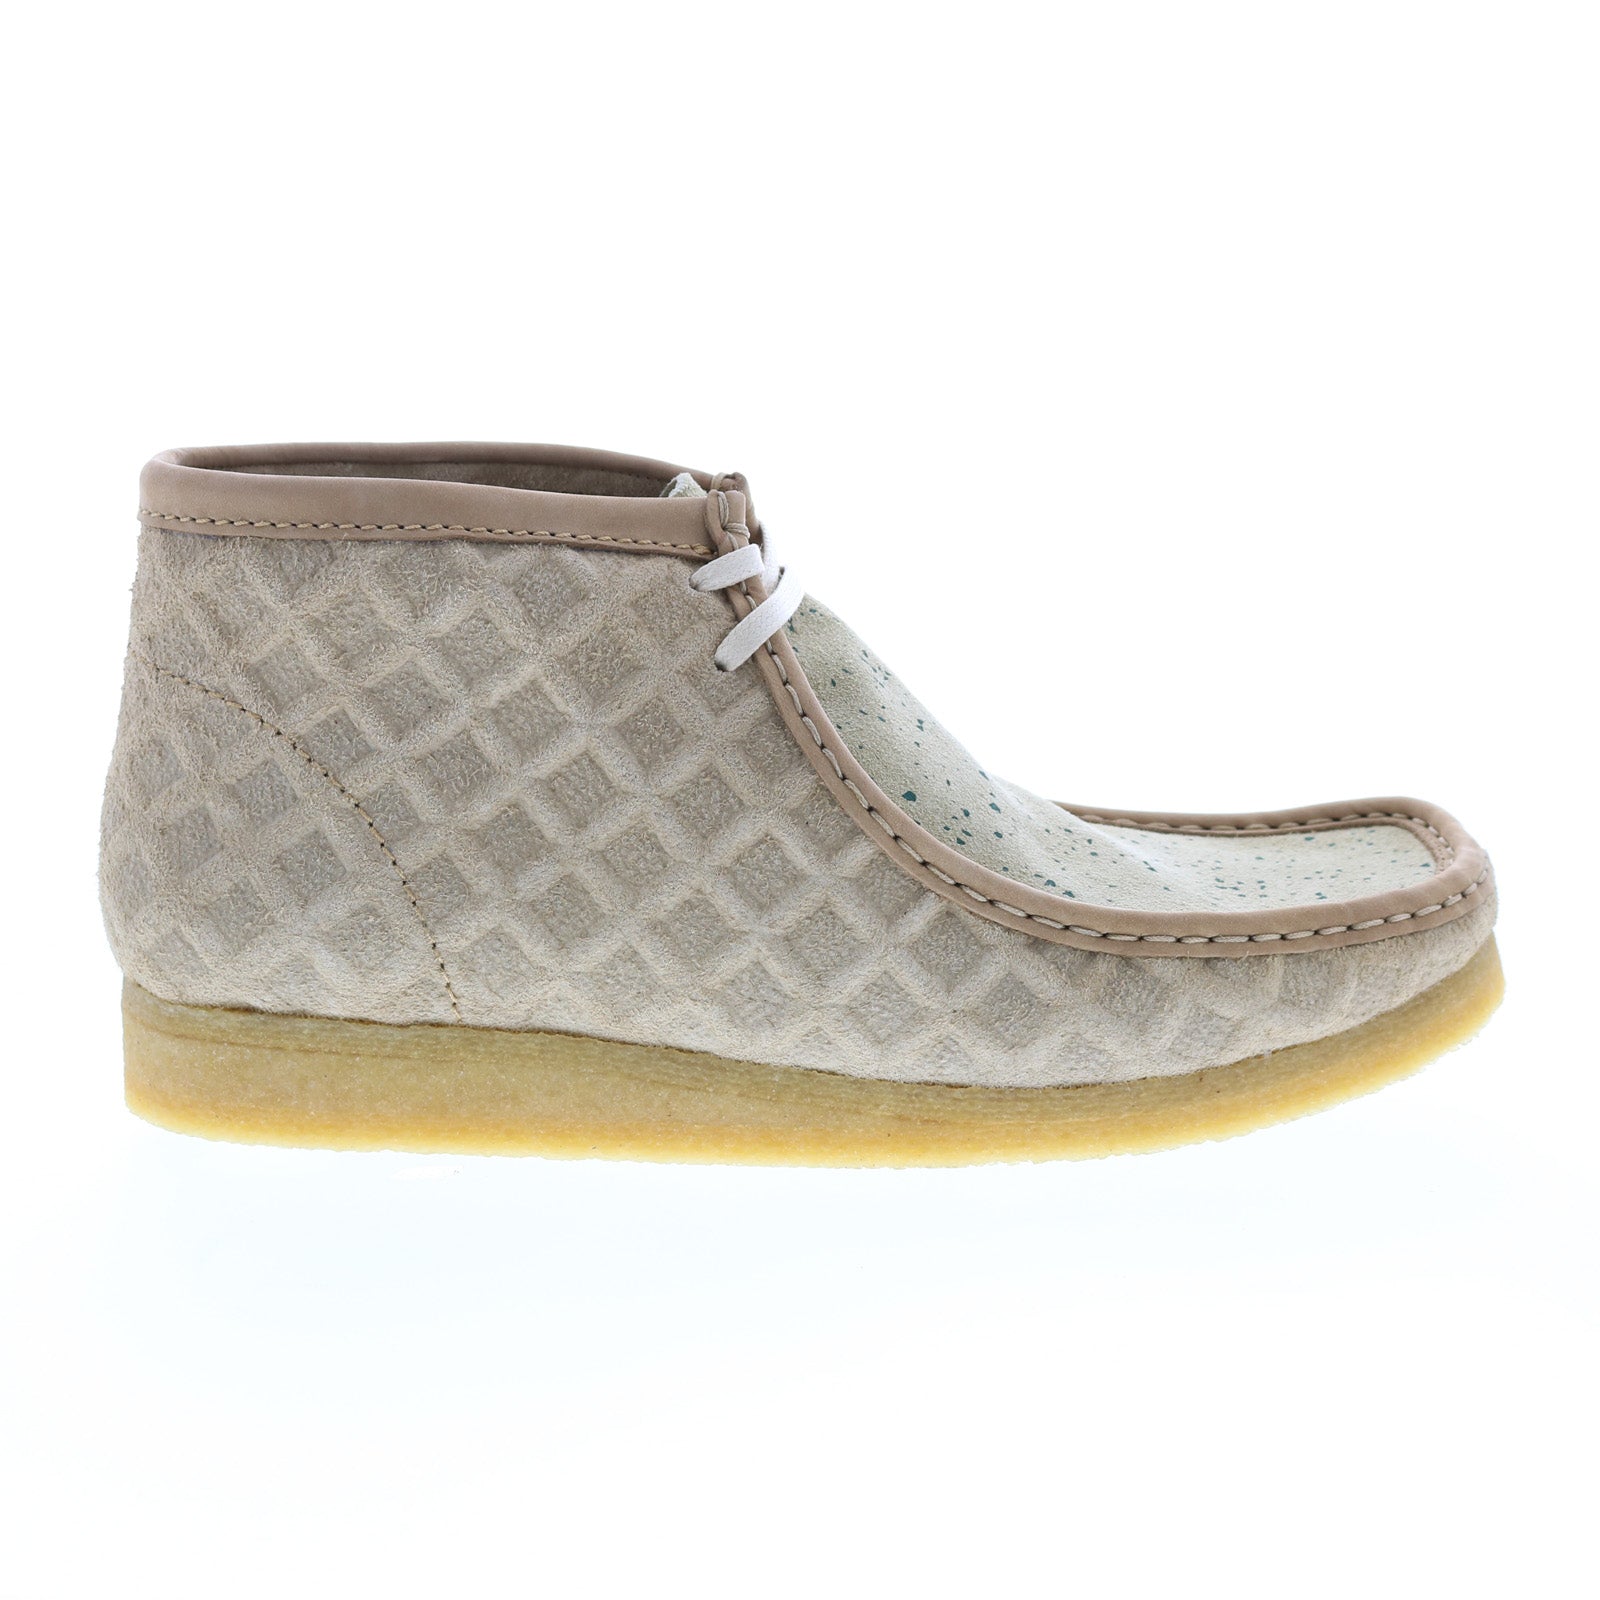 Clarks Wallabee Boot in Natural